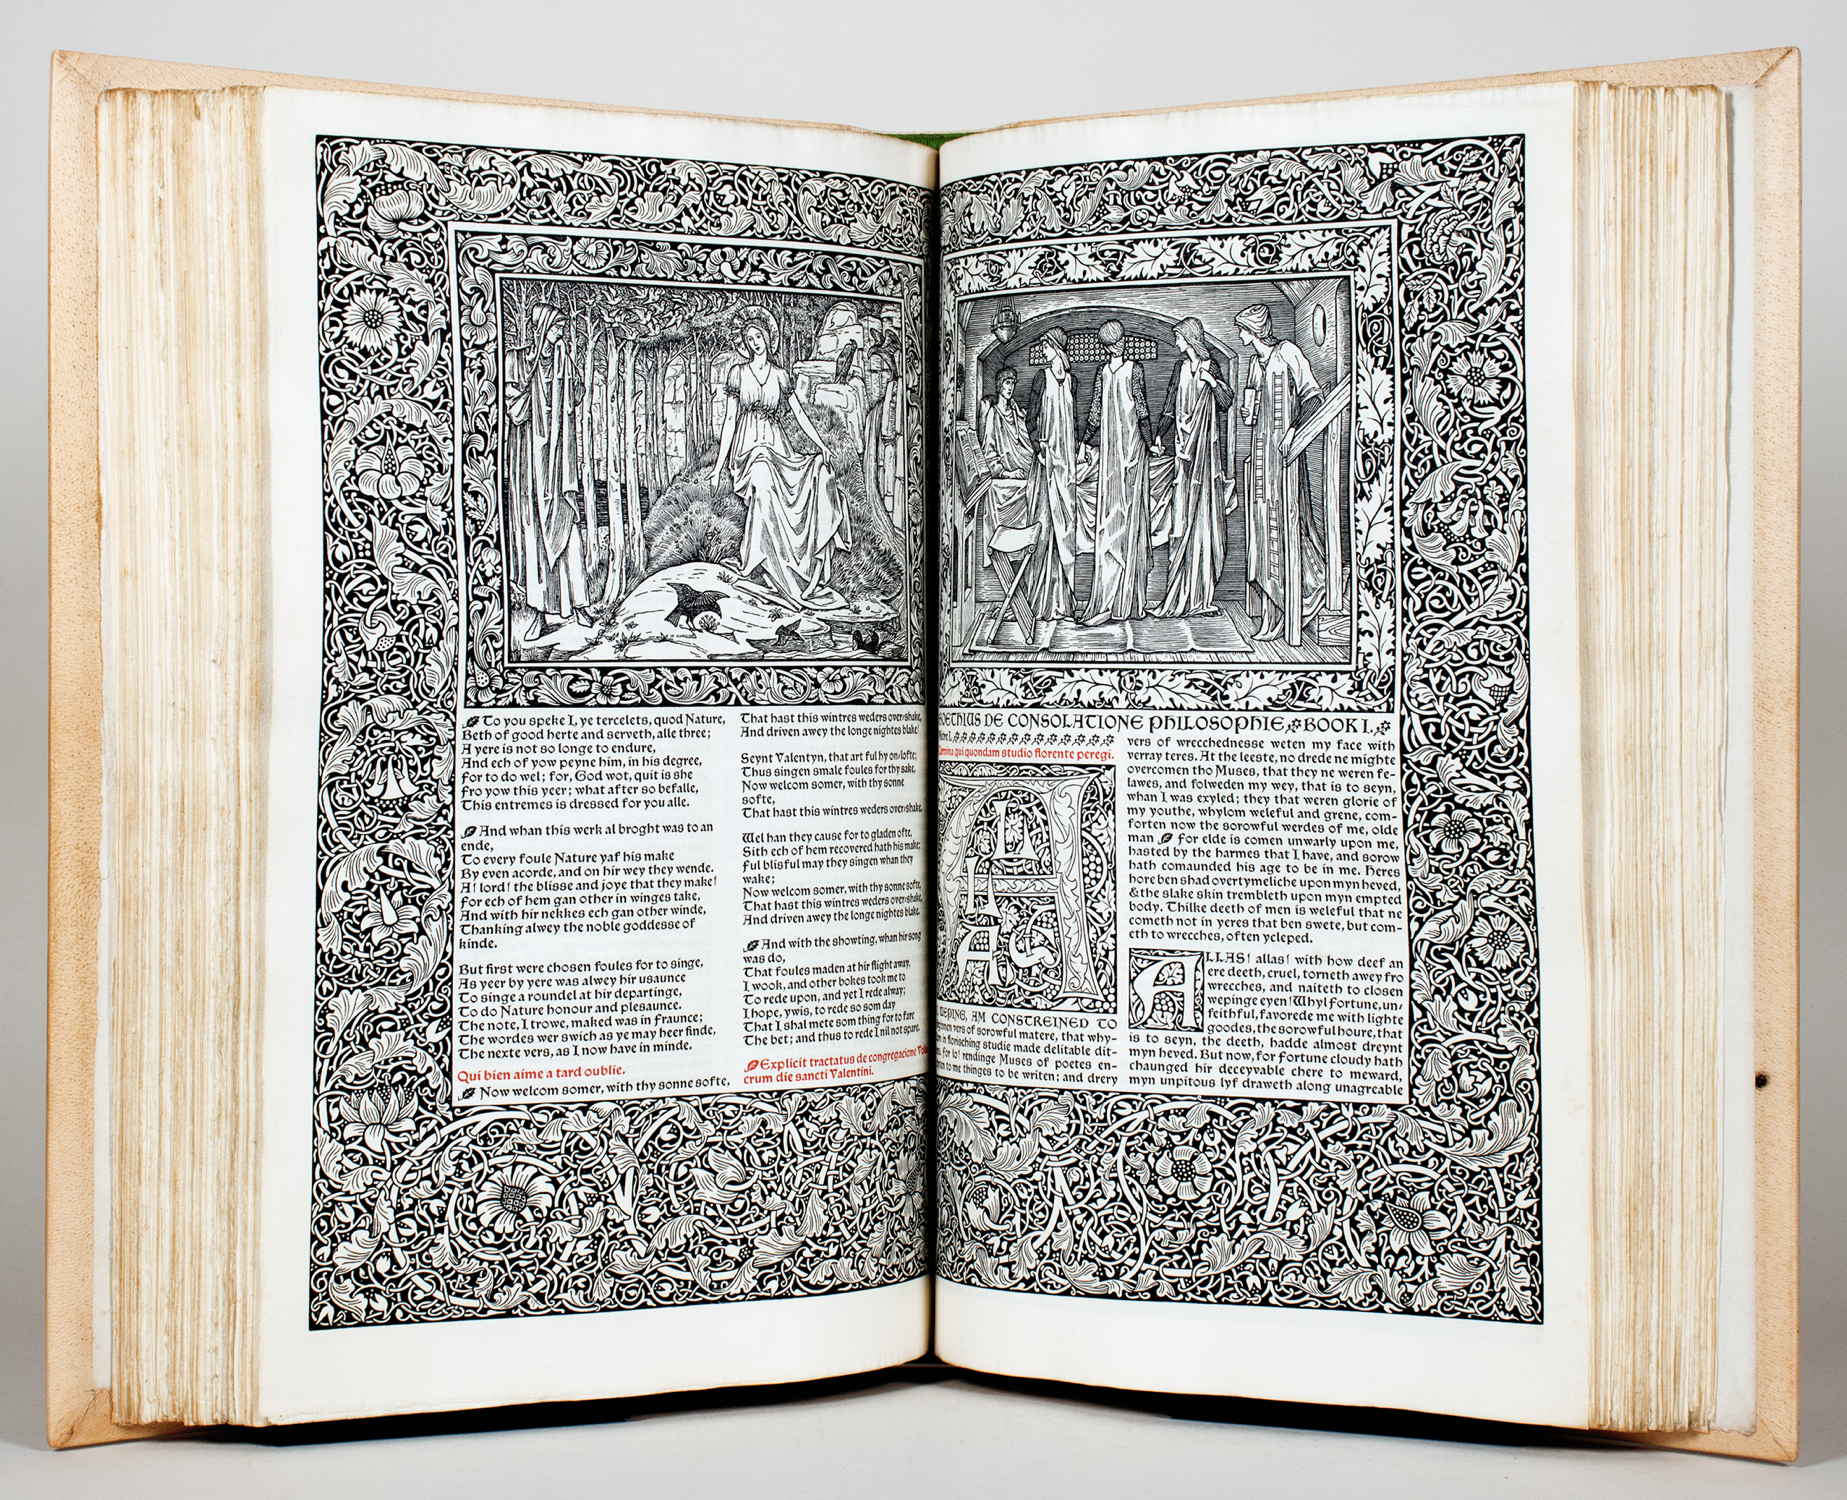 Kelmscott - Chaucer. The Works. 1896 - Image 4 of 7